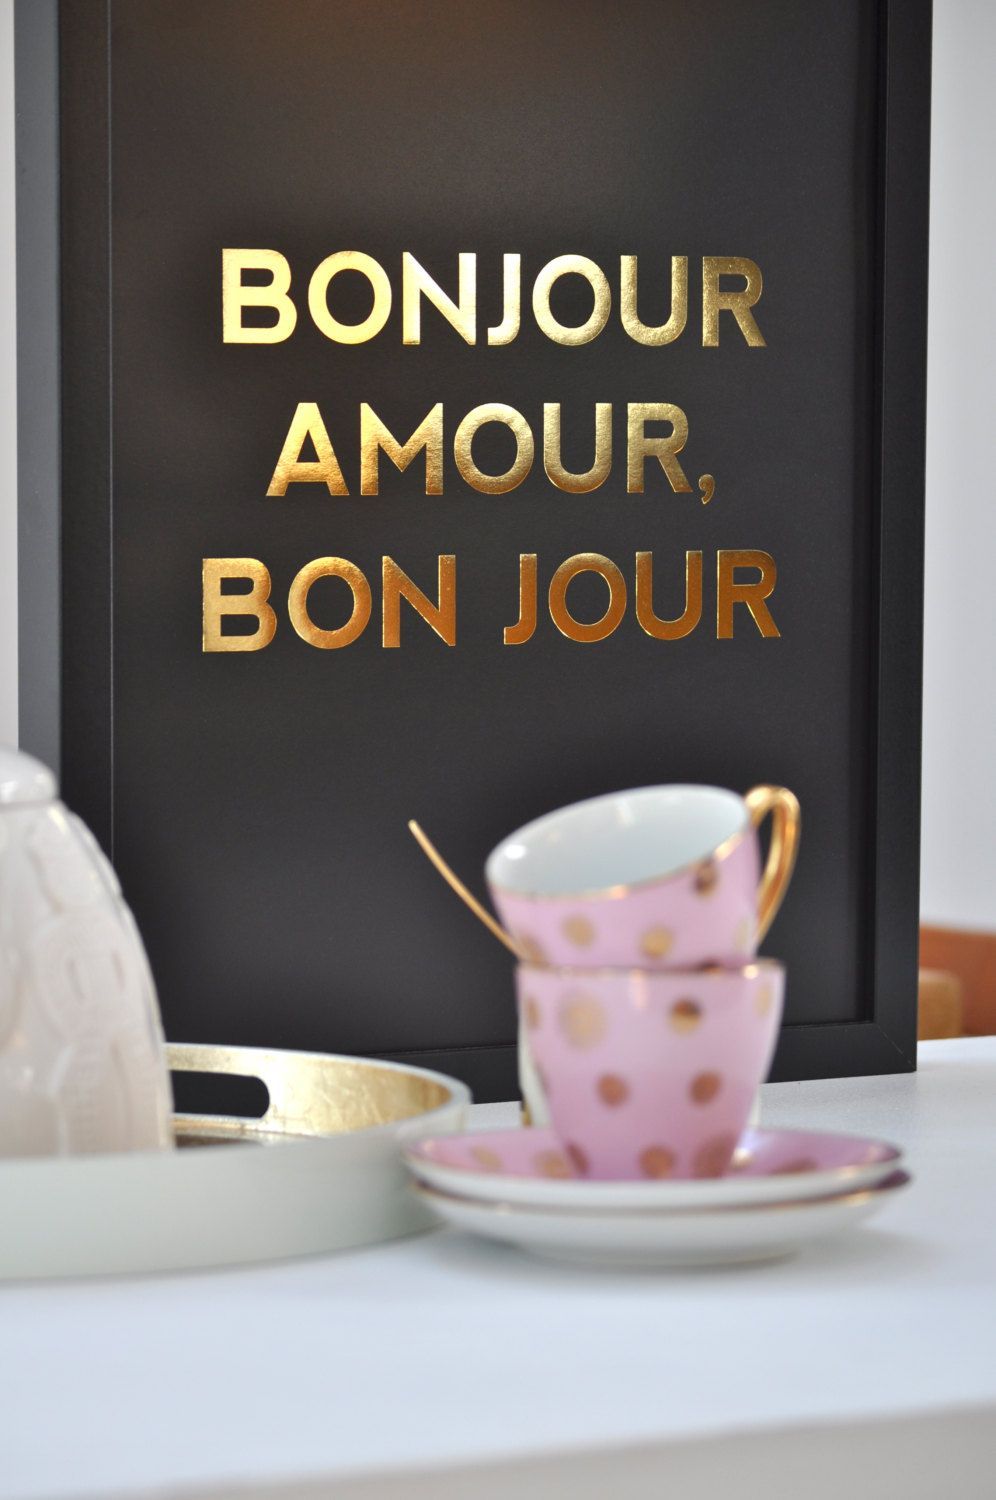 Bonjour Amour, Bon Jour / Good Morning Love, Have a Good Day.